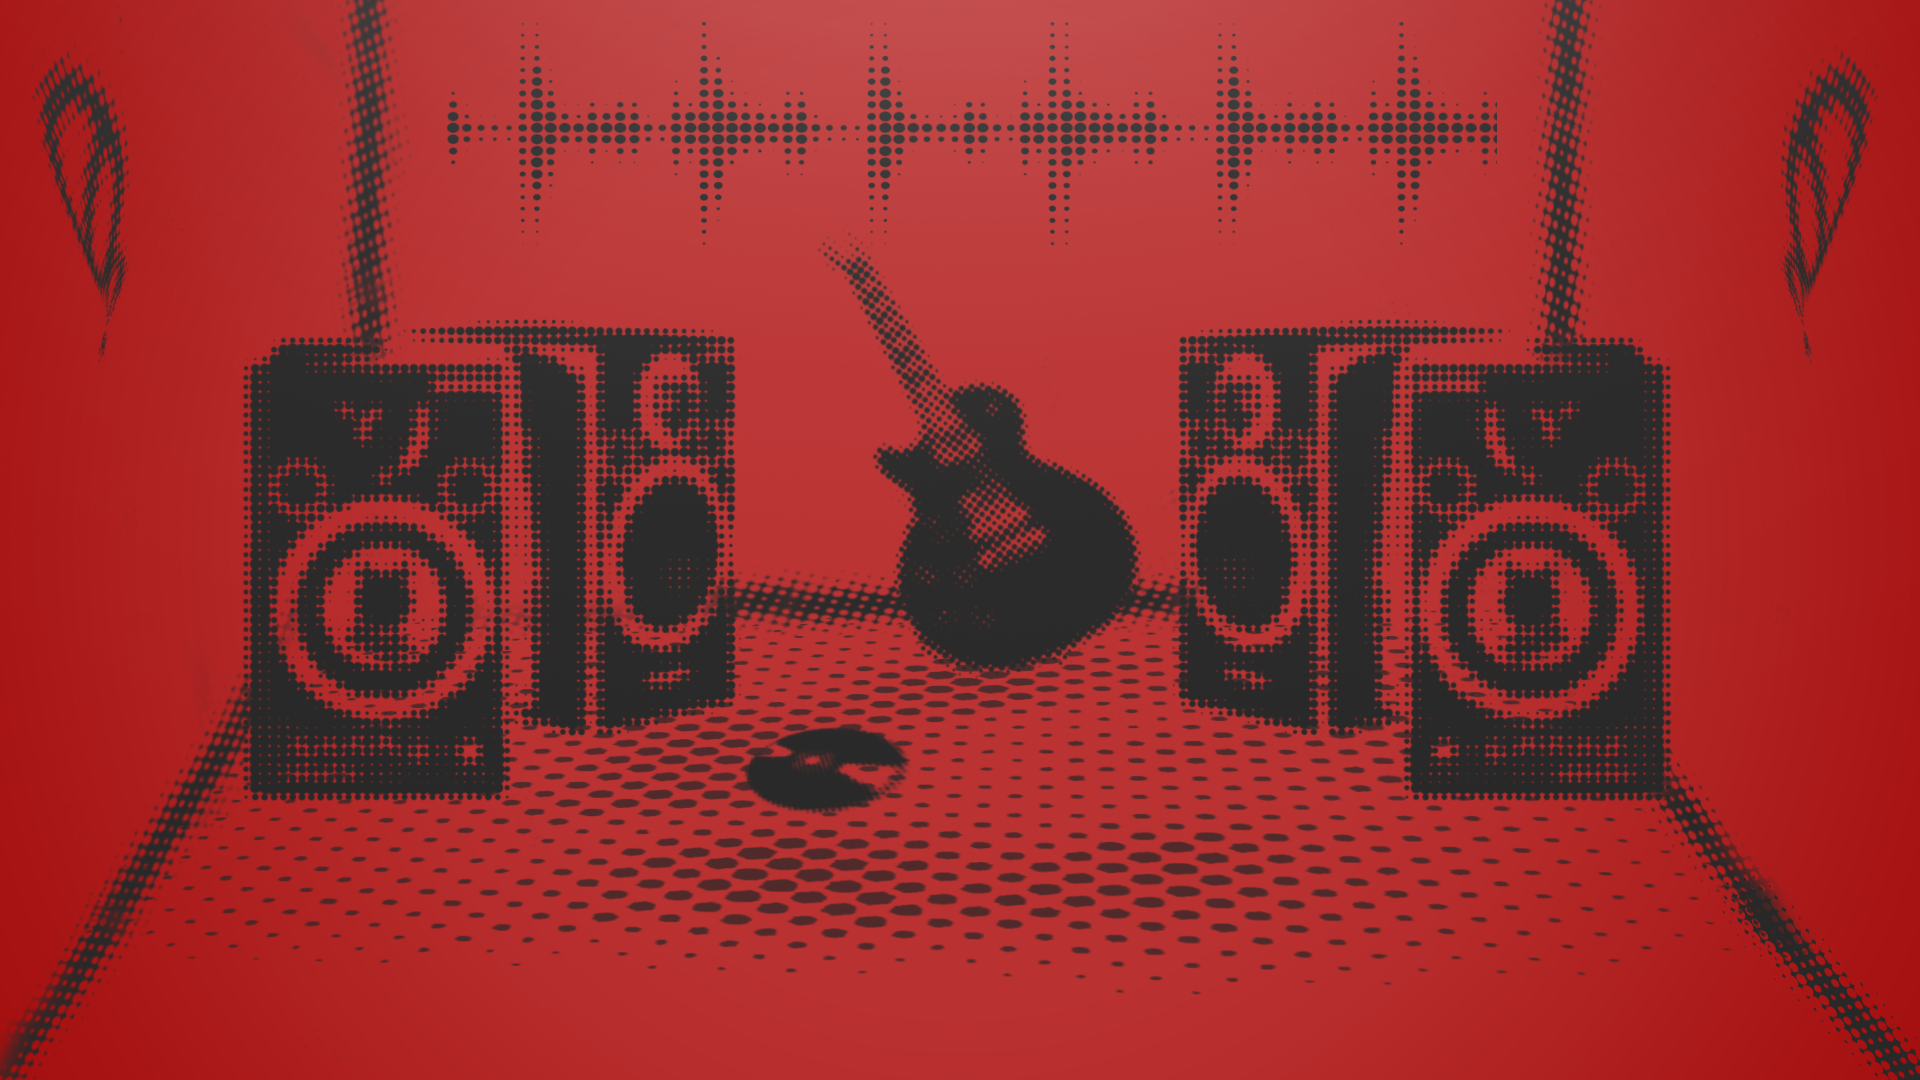 General 1920x1080 studios Music is Life music guitar electric guitar bass guitars red black musical instrument audio-technica speakers artwork red background